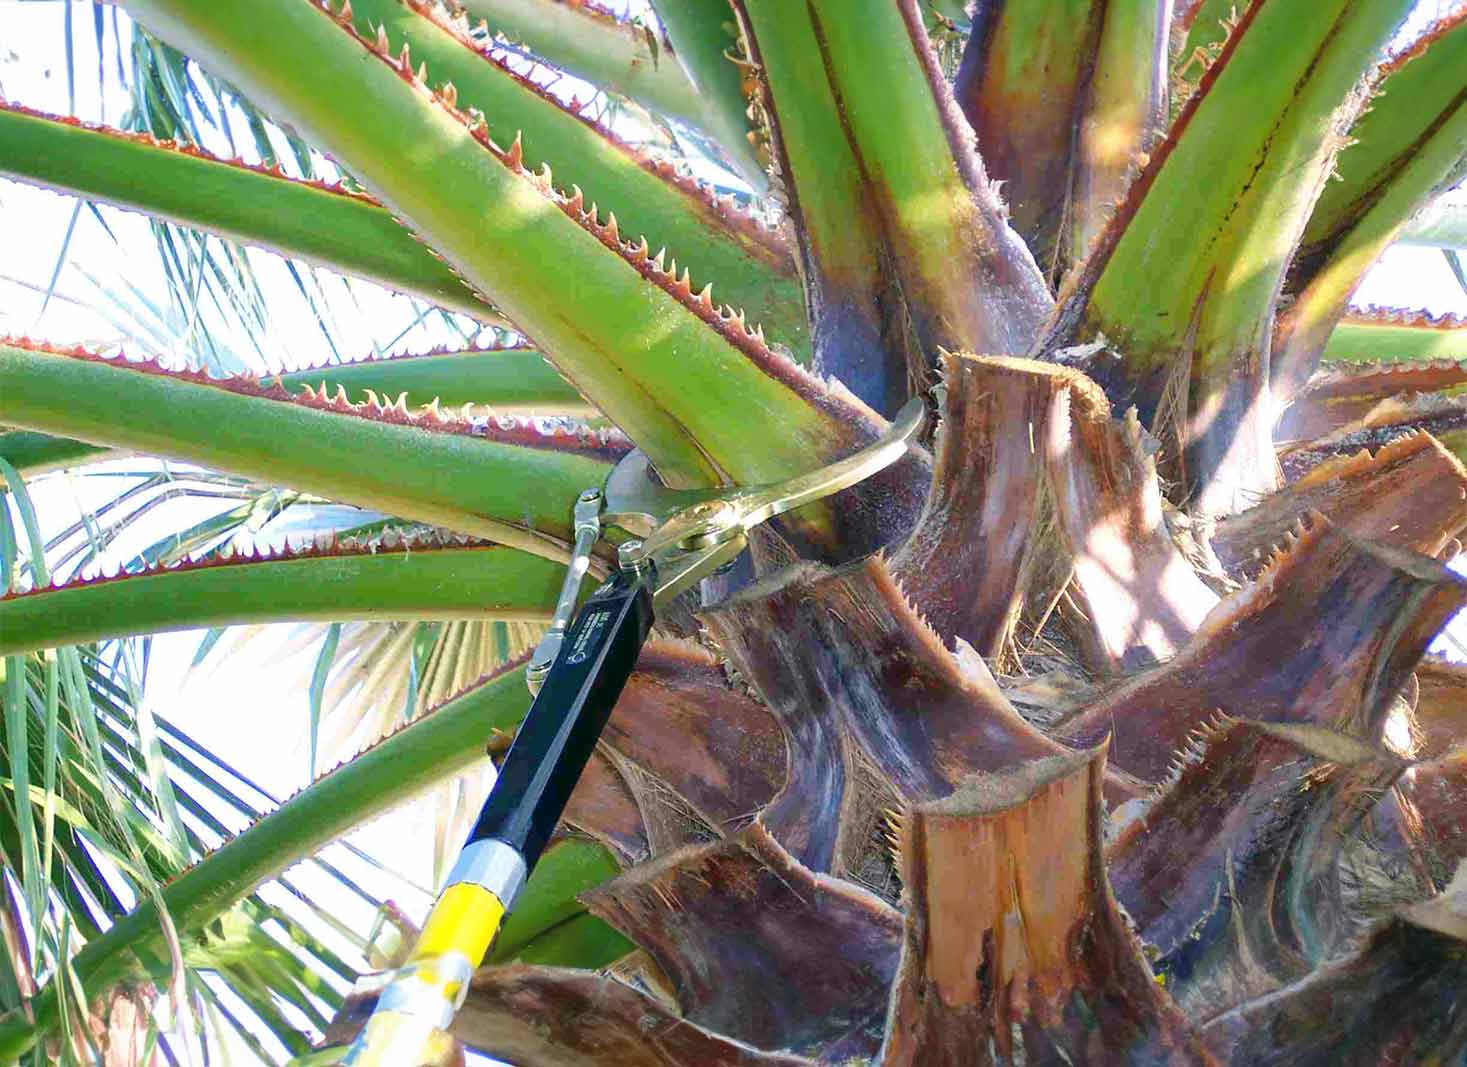 A person using palm tree trimming tools